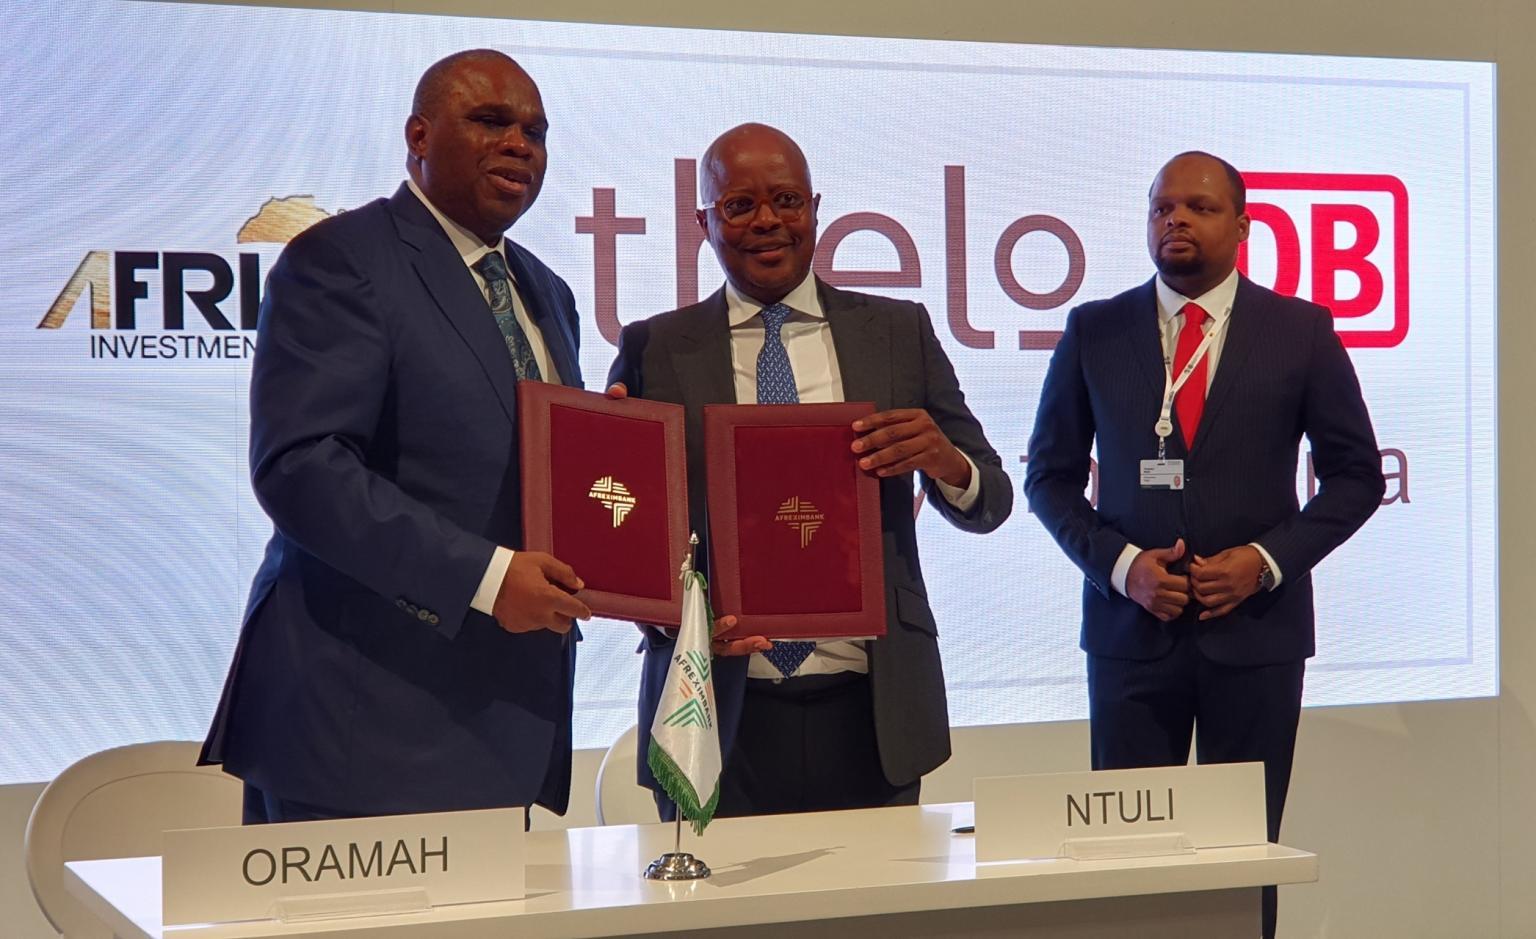 Afreximbank, Thelo DB Sign MoU For Railway Development In Africa